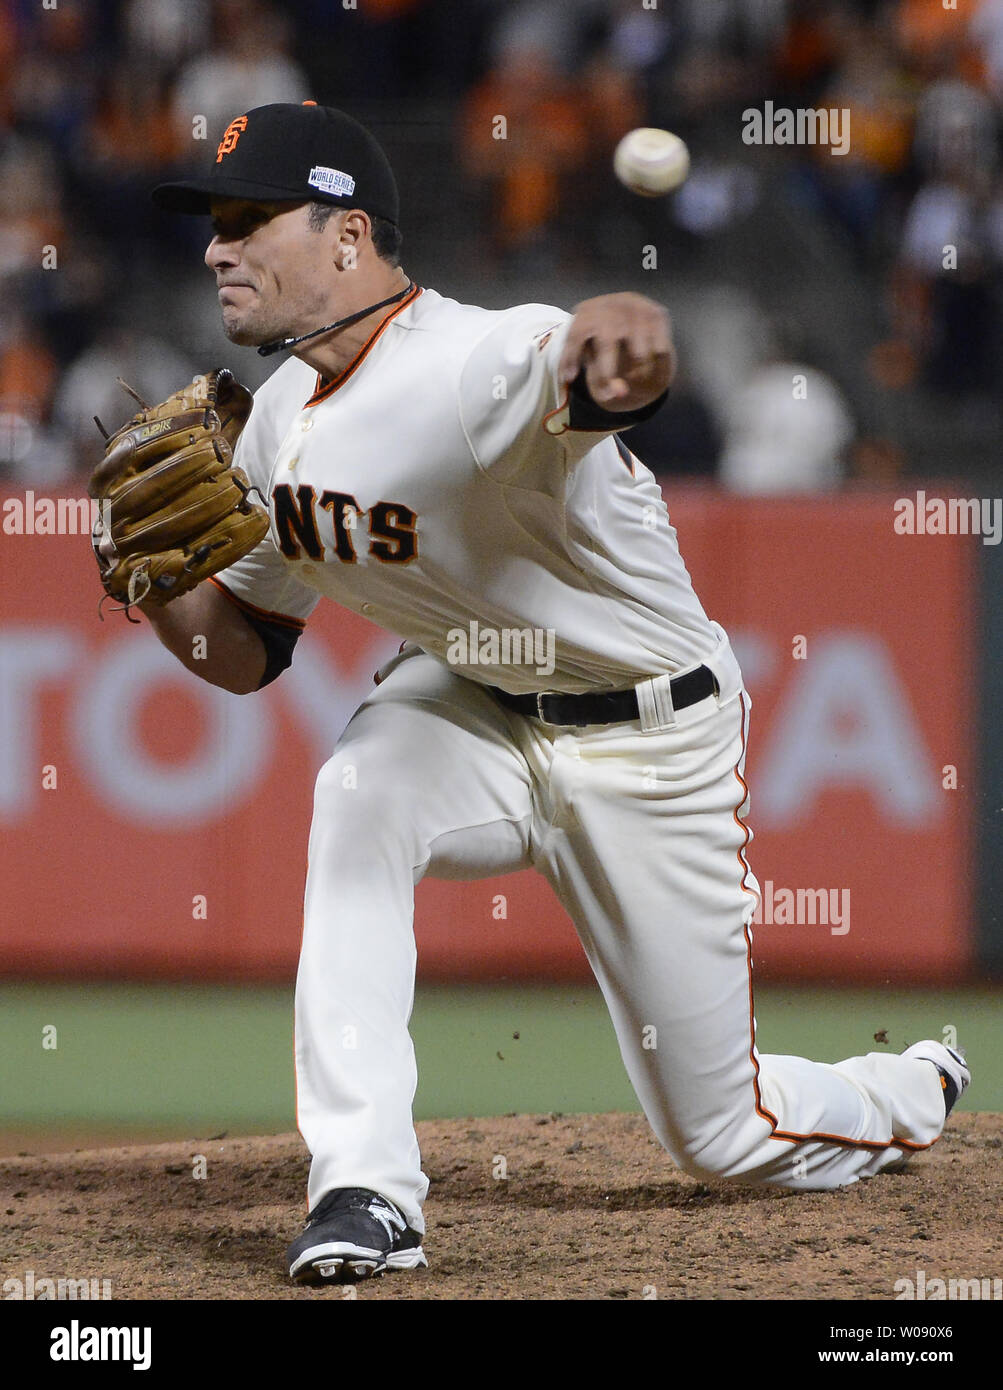 San Francisco Giants reliever Javier Lopez throws against the Kansas City Royals during the sixth inning of game 3 of the World Series at AT&T Park in San Francisco on October 24, 2014.  UPI/Terry Schmitt Stock Photo